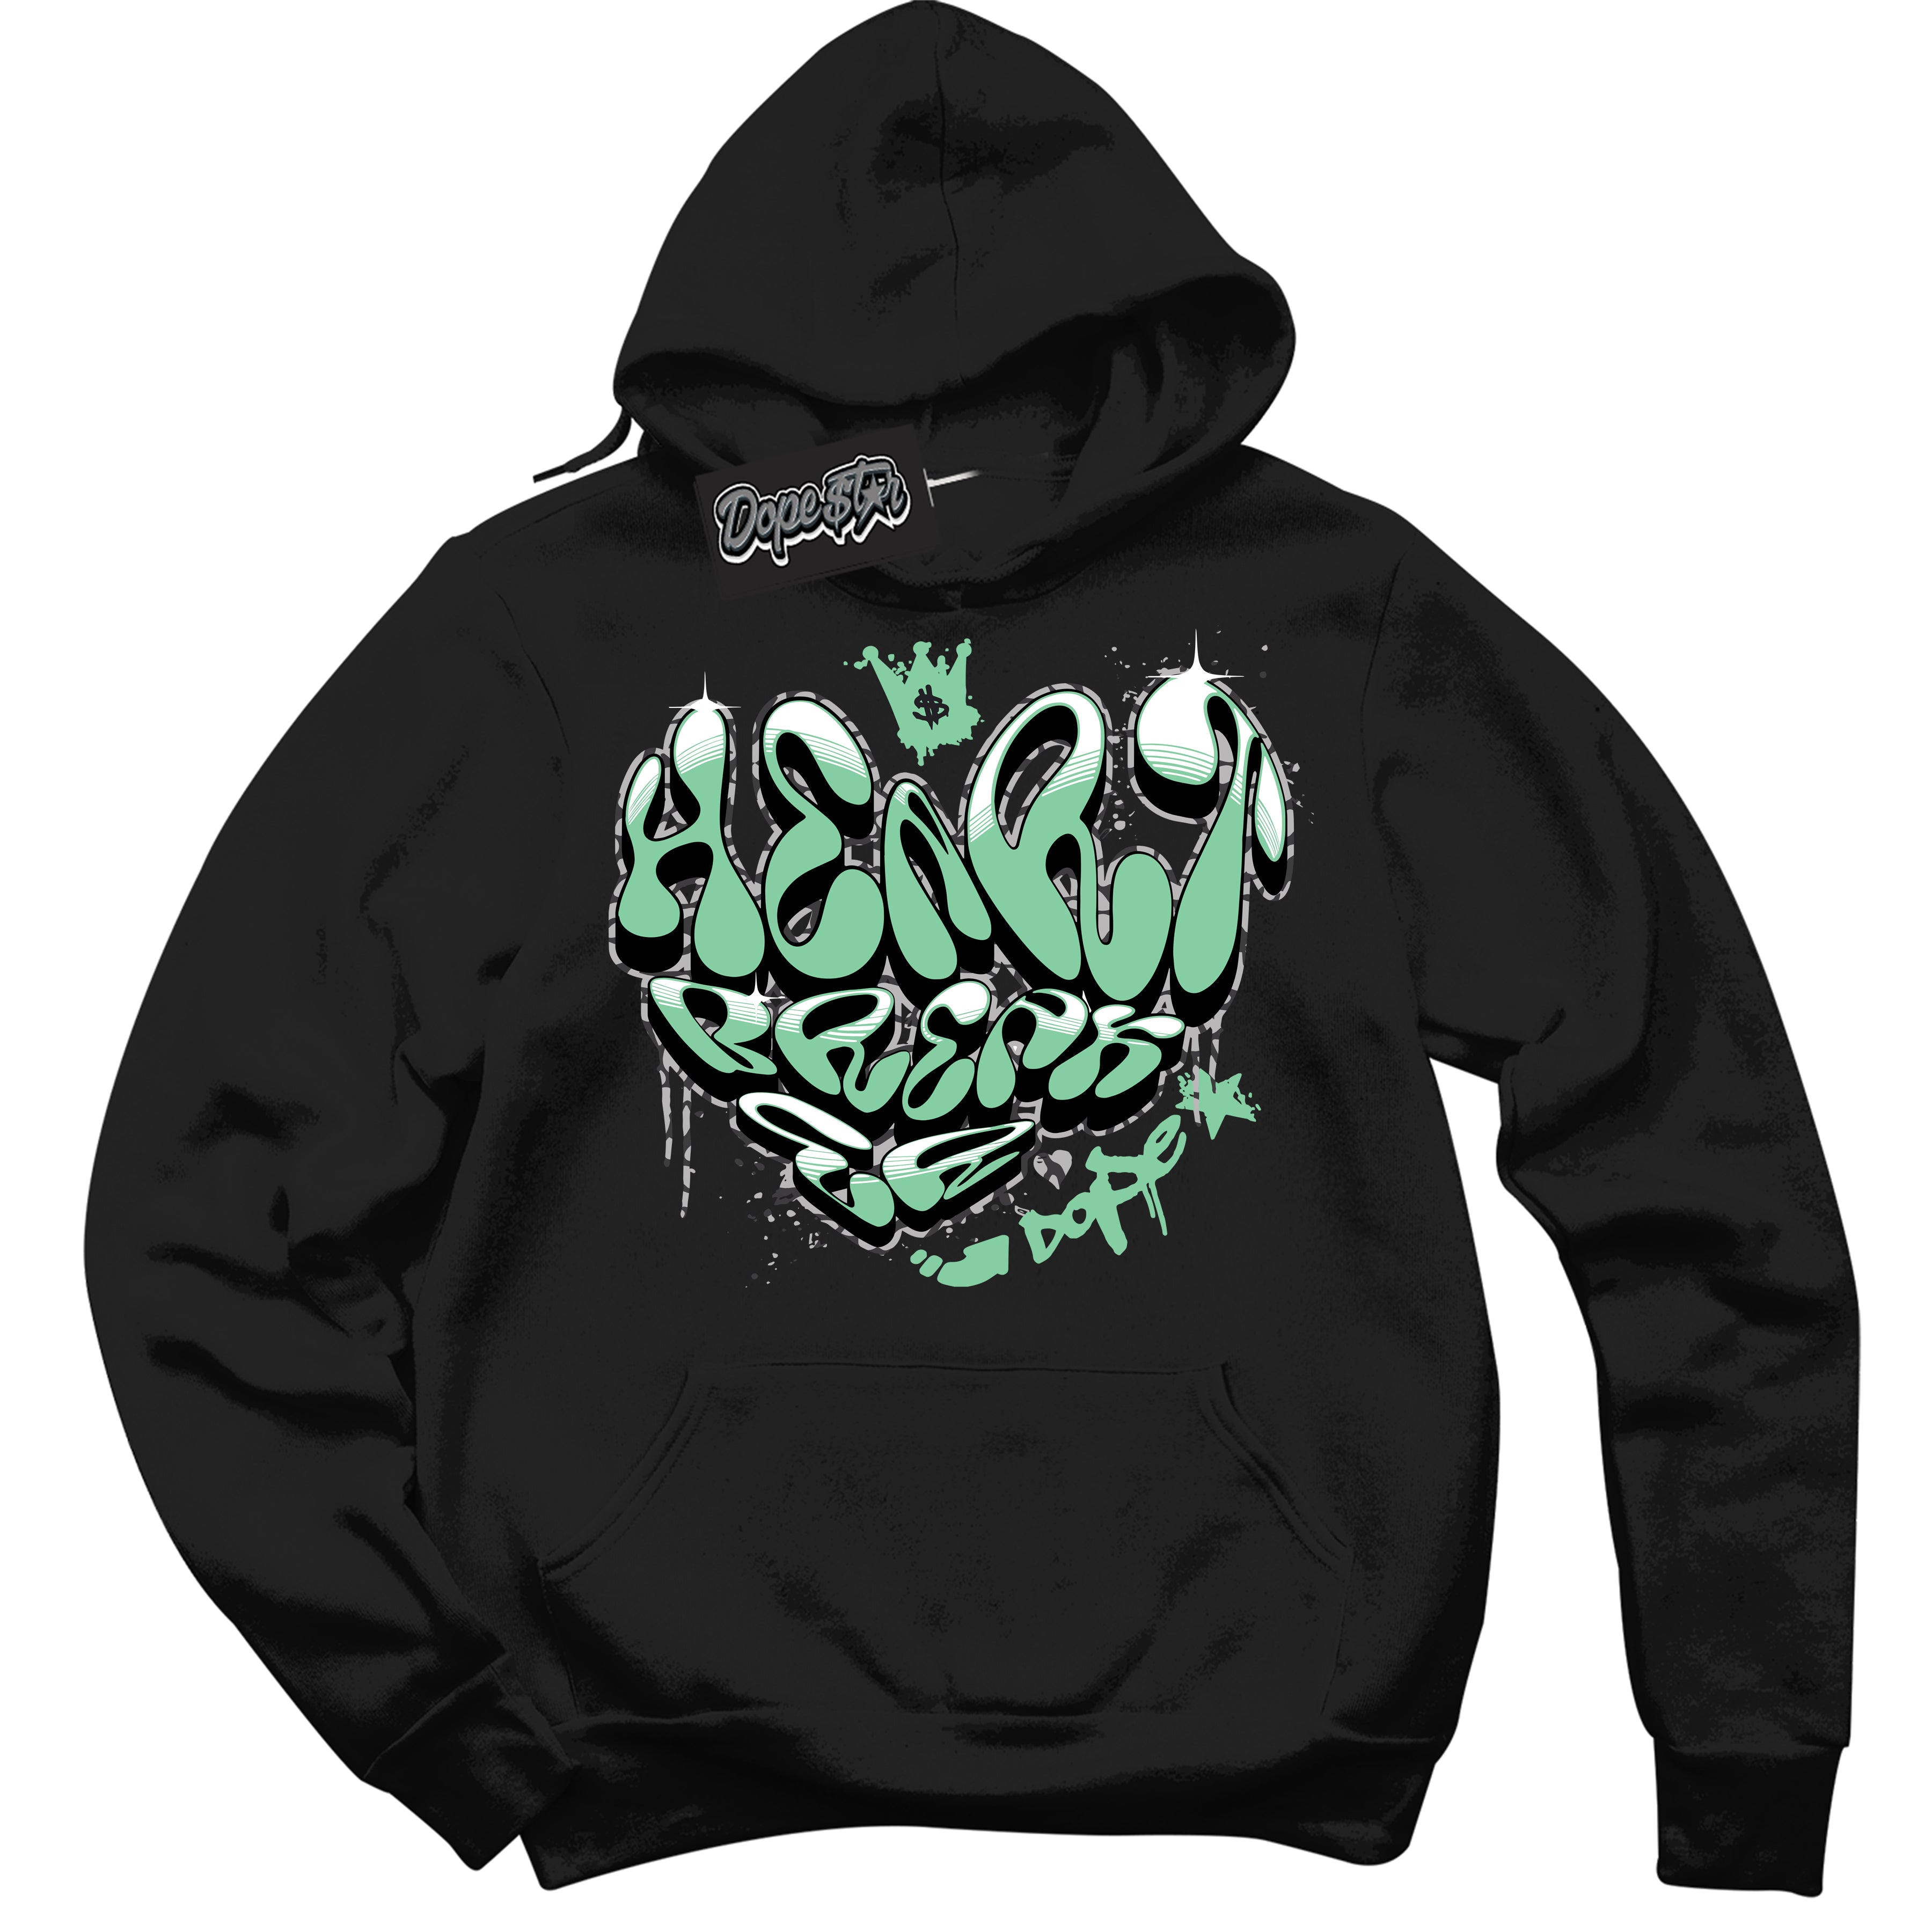 Cool Black Graphic DopeStar Hoodie with “ Heartbreaker Graffiti “ print, that perfectly matches Green Glow 3S sneakers